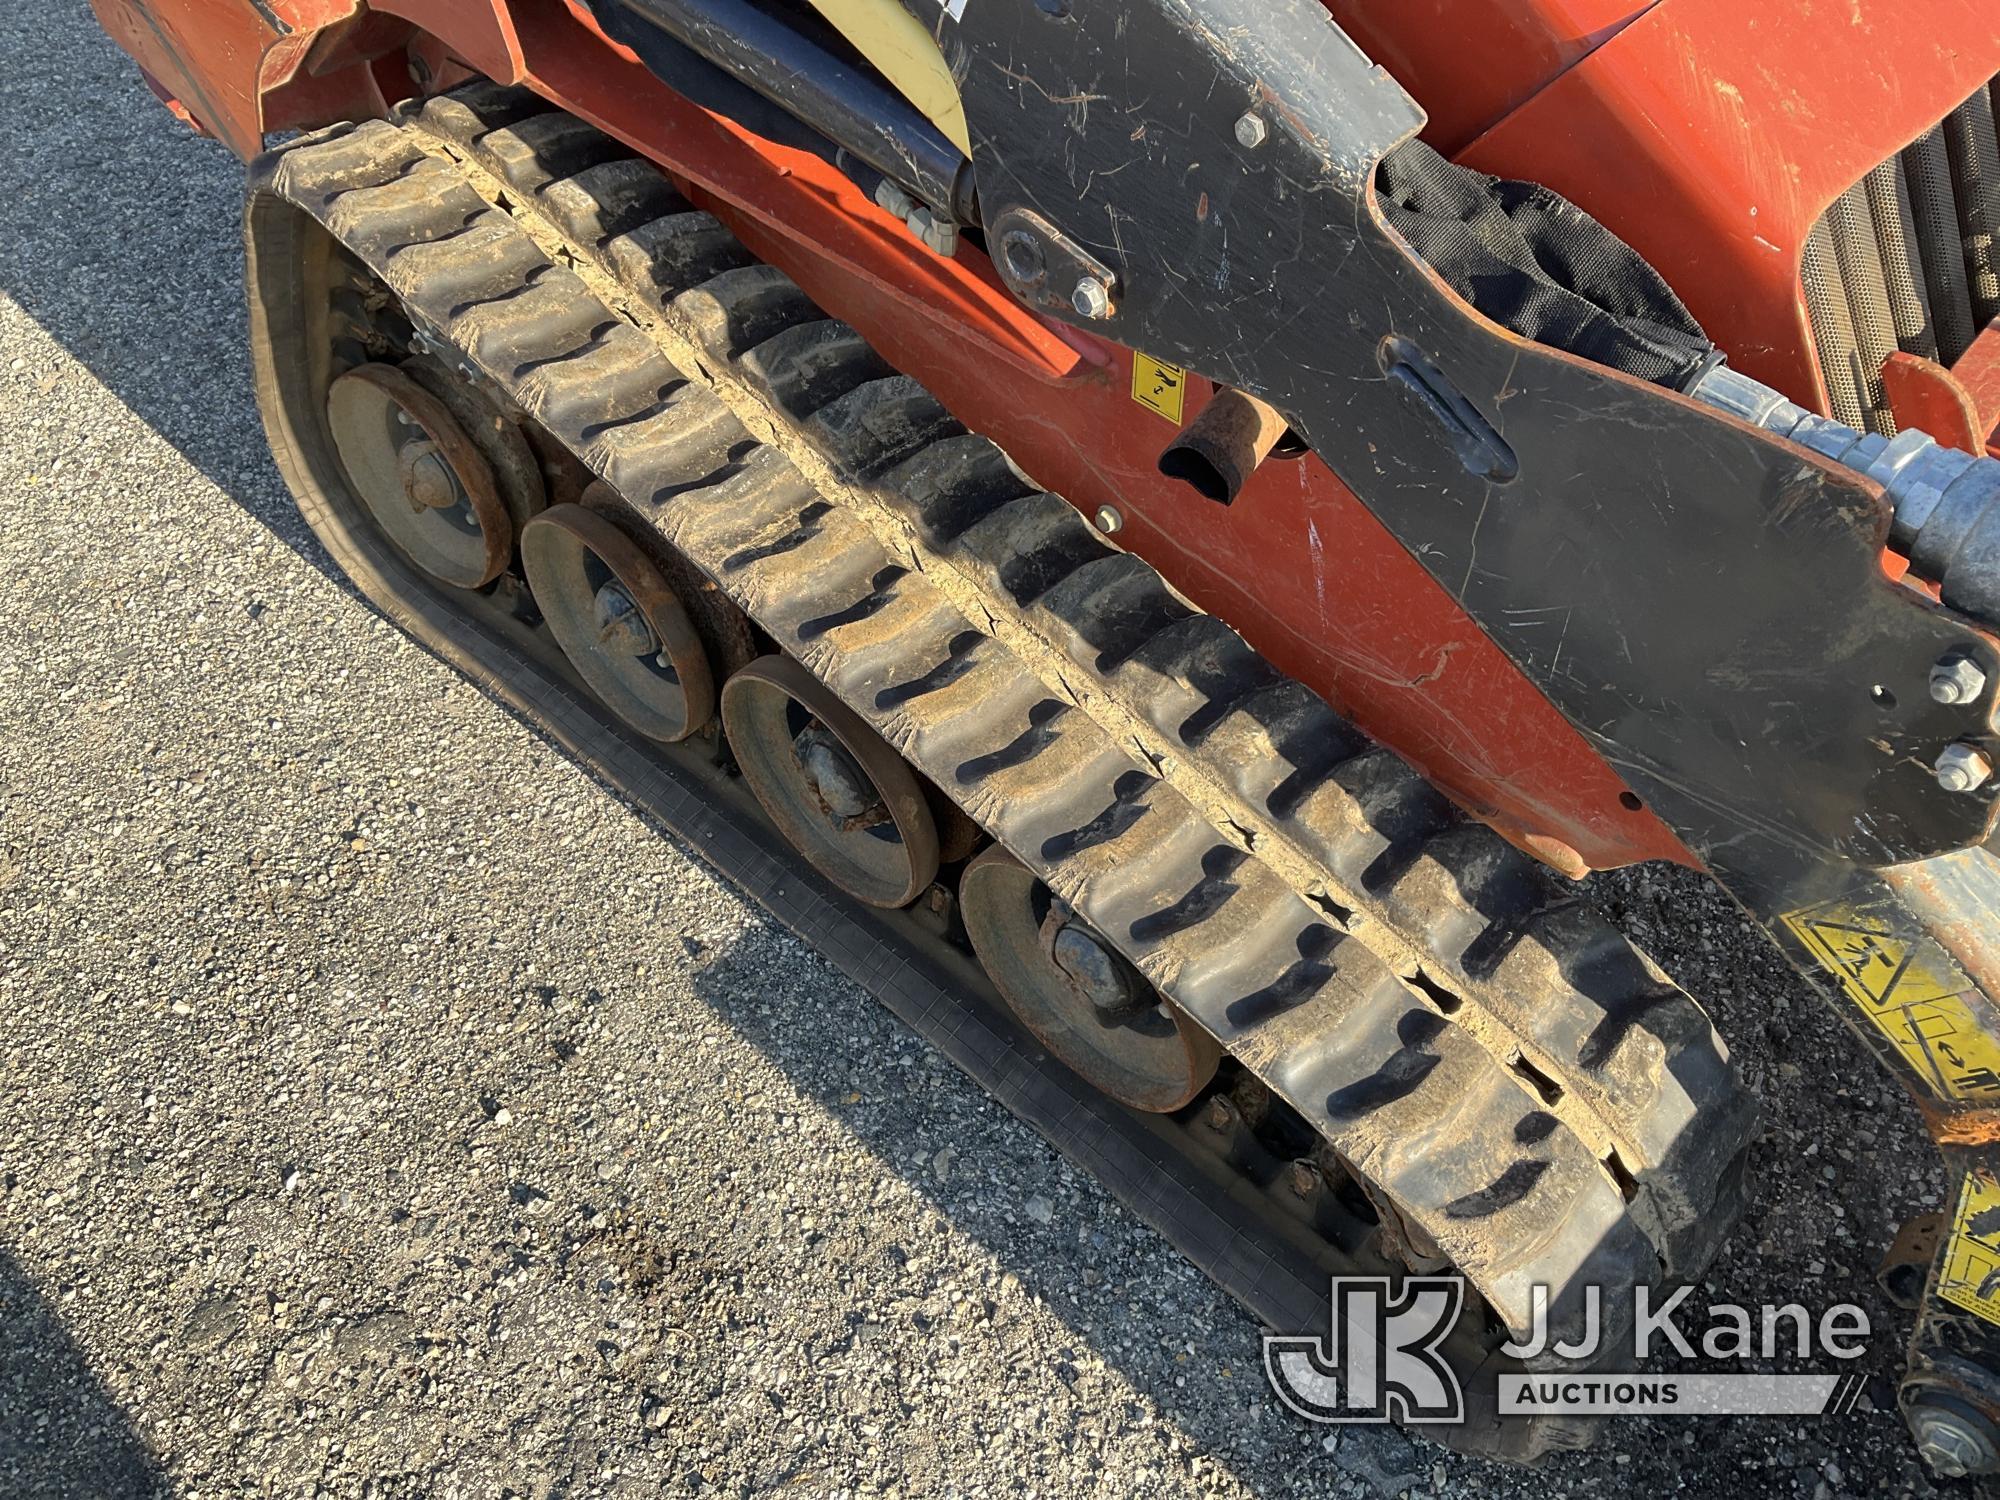 (Plymouth Meeting, PA) 2019 Ditch Witch SK800 Stand-Up Skid Steer Loader Runs & Operates